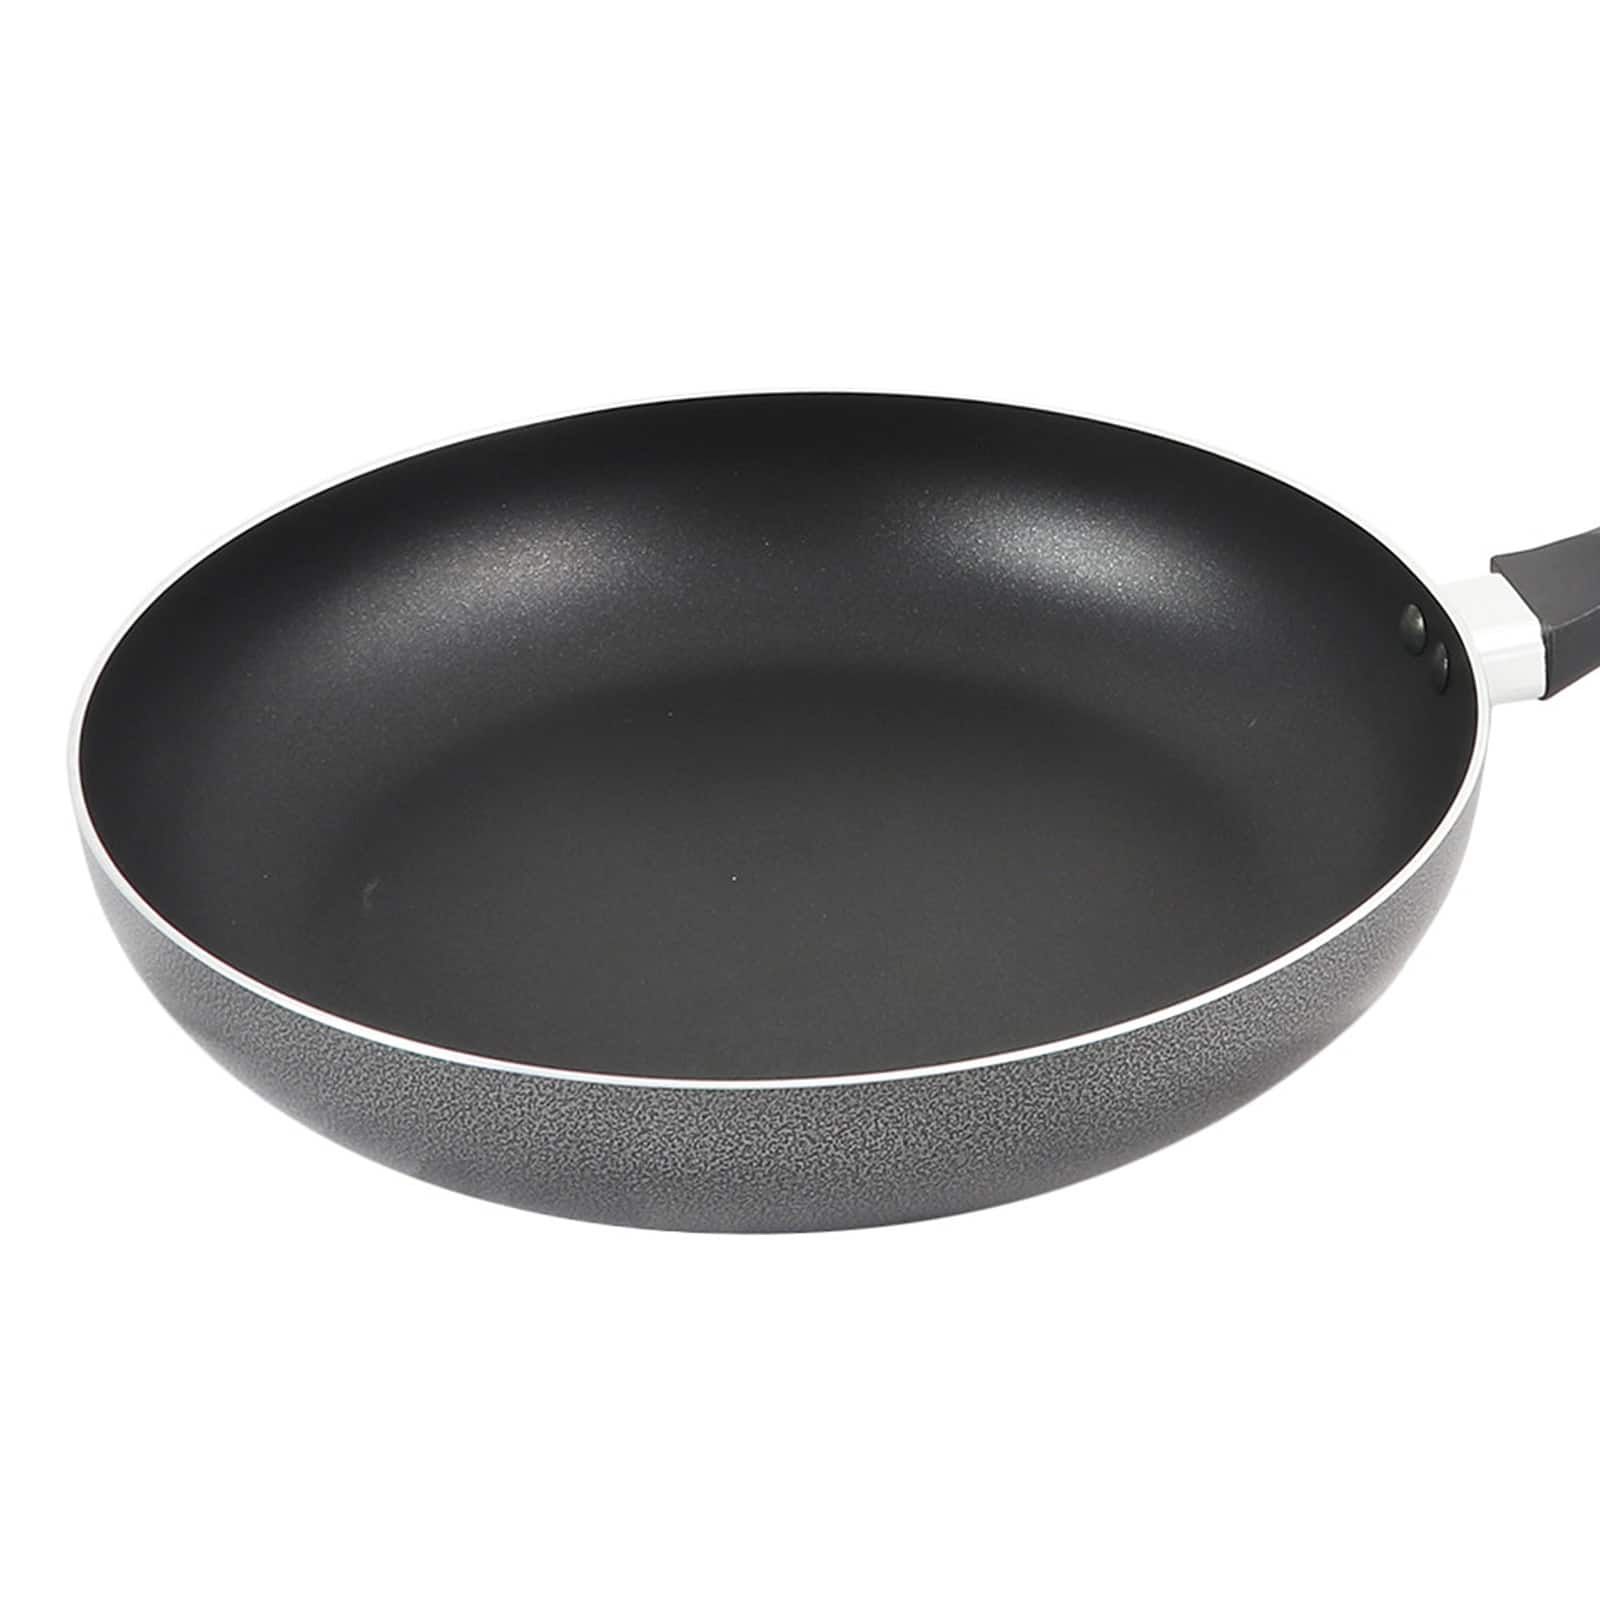 Oster Clairborne 12 in. Aluminum Saute Pan with Lid in Charcoal Grey